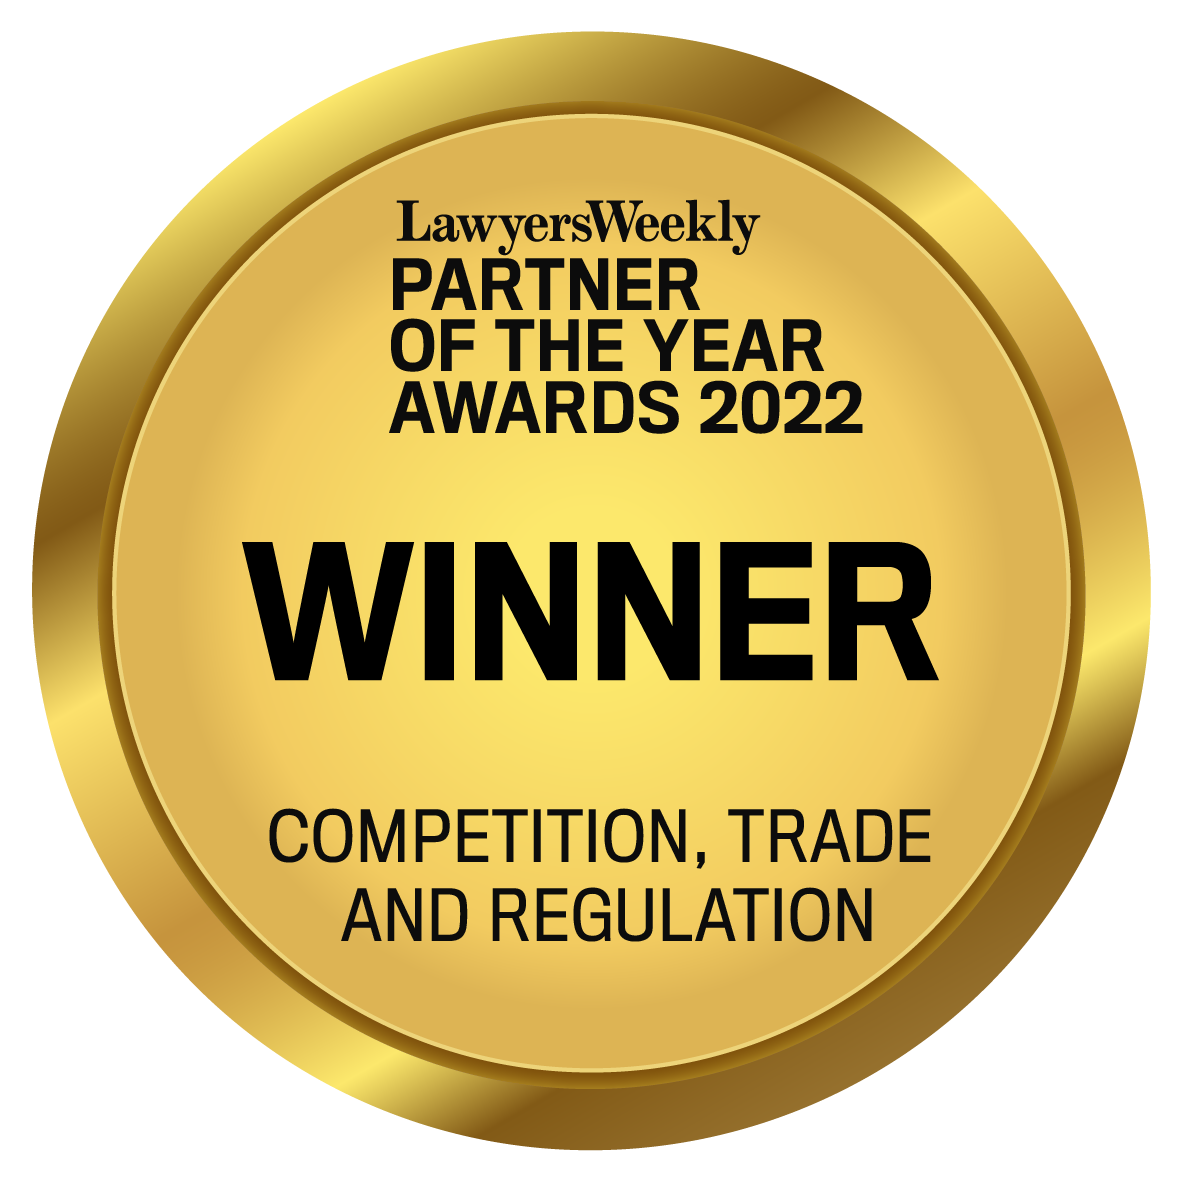 https://legalite.com.au/wp-content/uploads/2023/01/Winners_Competition-Trade-and-Regulation-Marianne.png